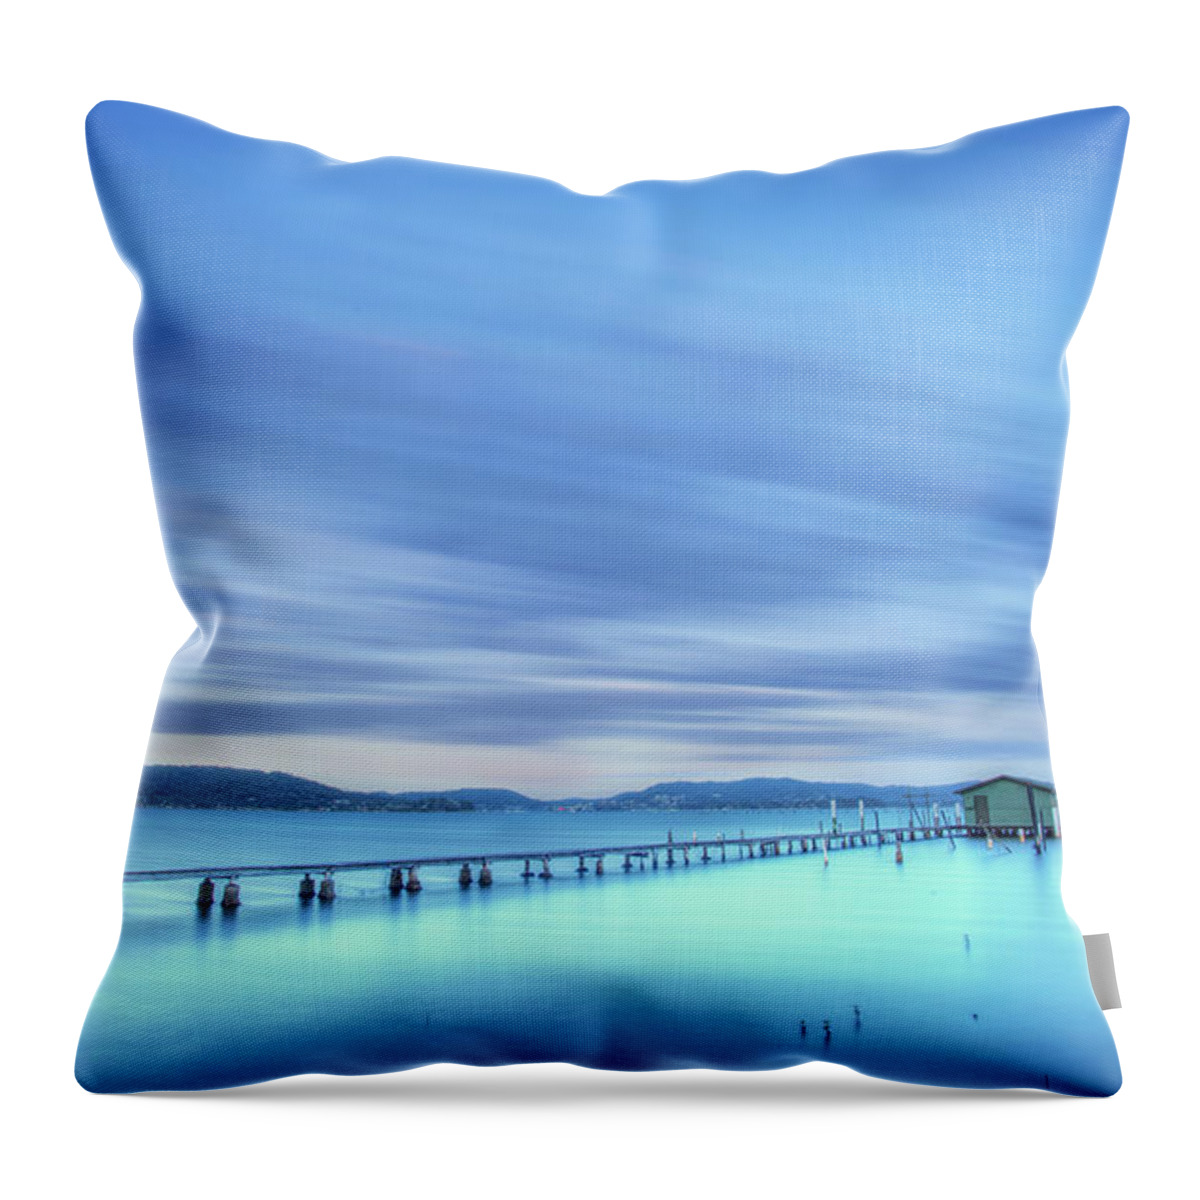 Tranquility Throw Pillow featuring the photograph Long Exposure Wharf by Steve Daggar Photography